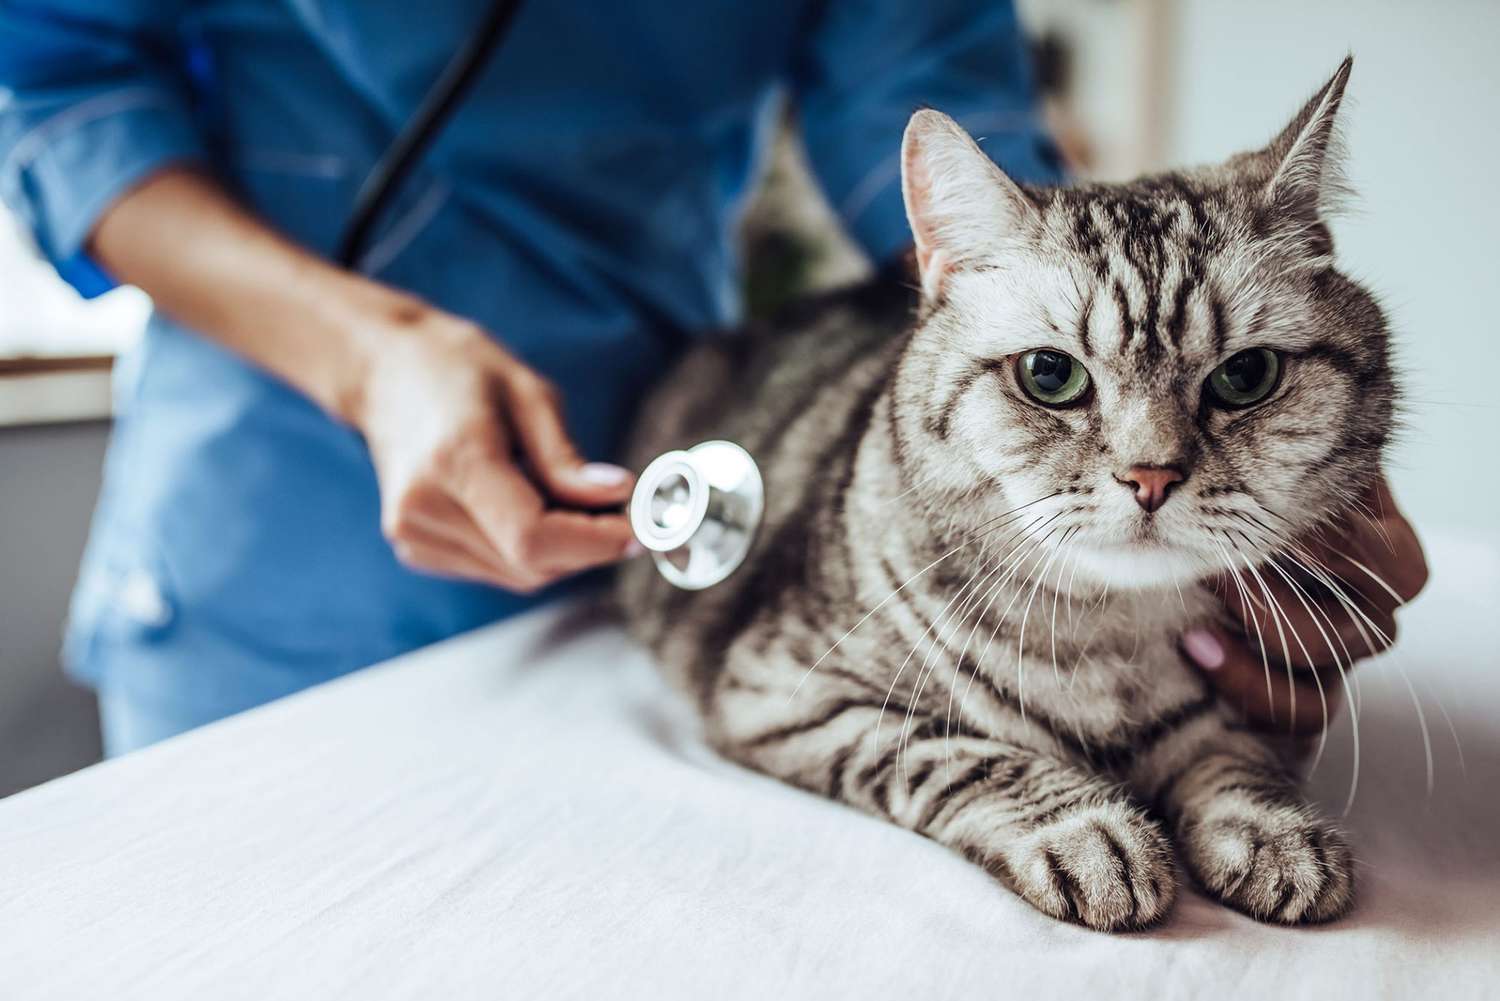 What Is Pancreatitis & How Do I Take Care of a Cat Who Has It?